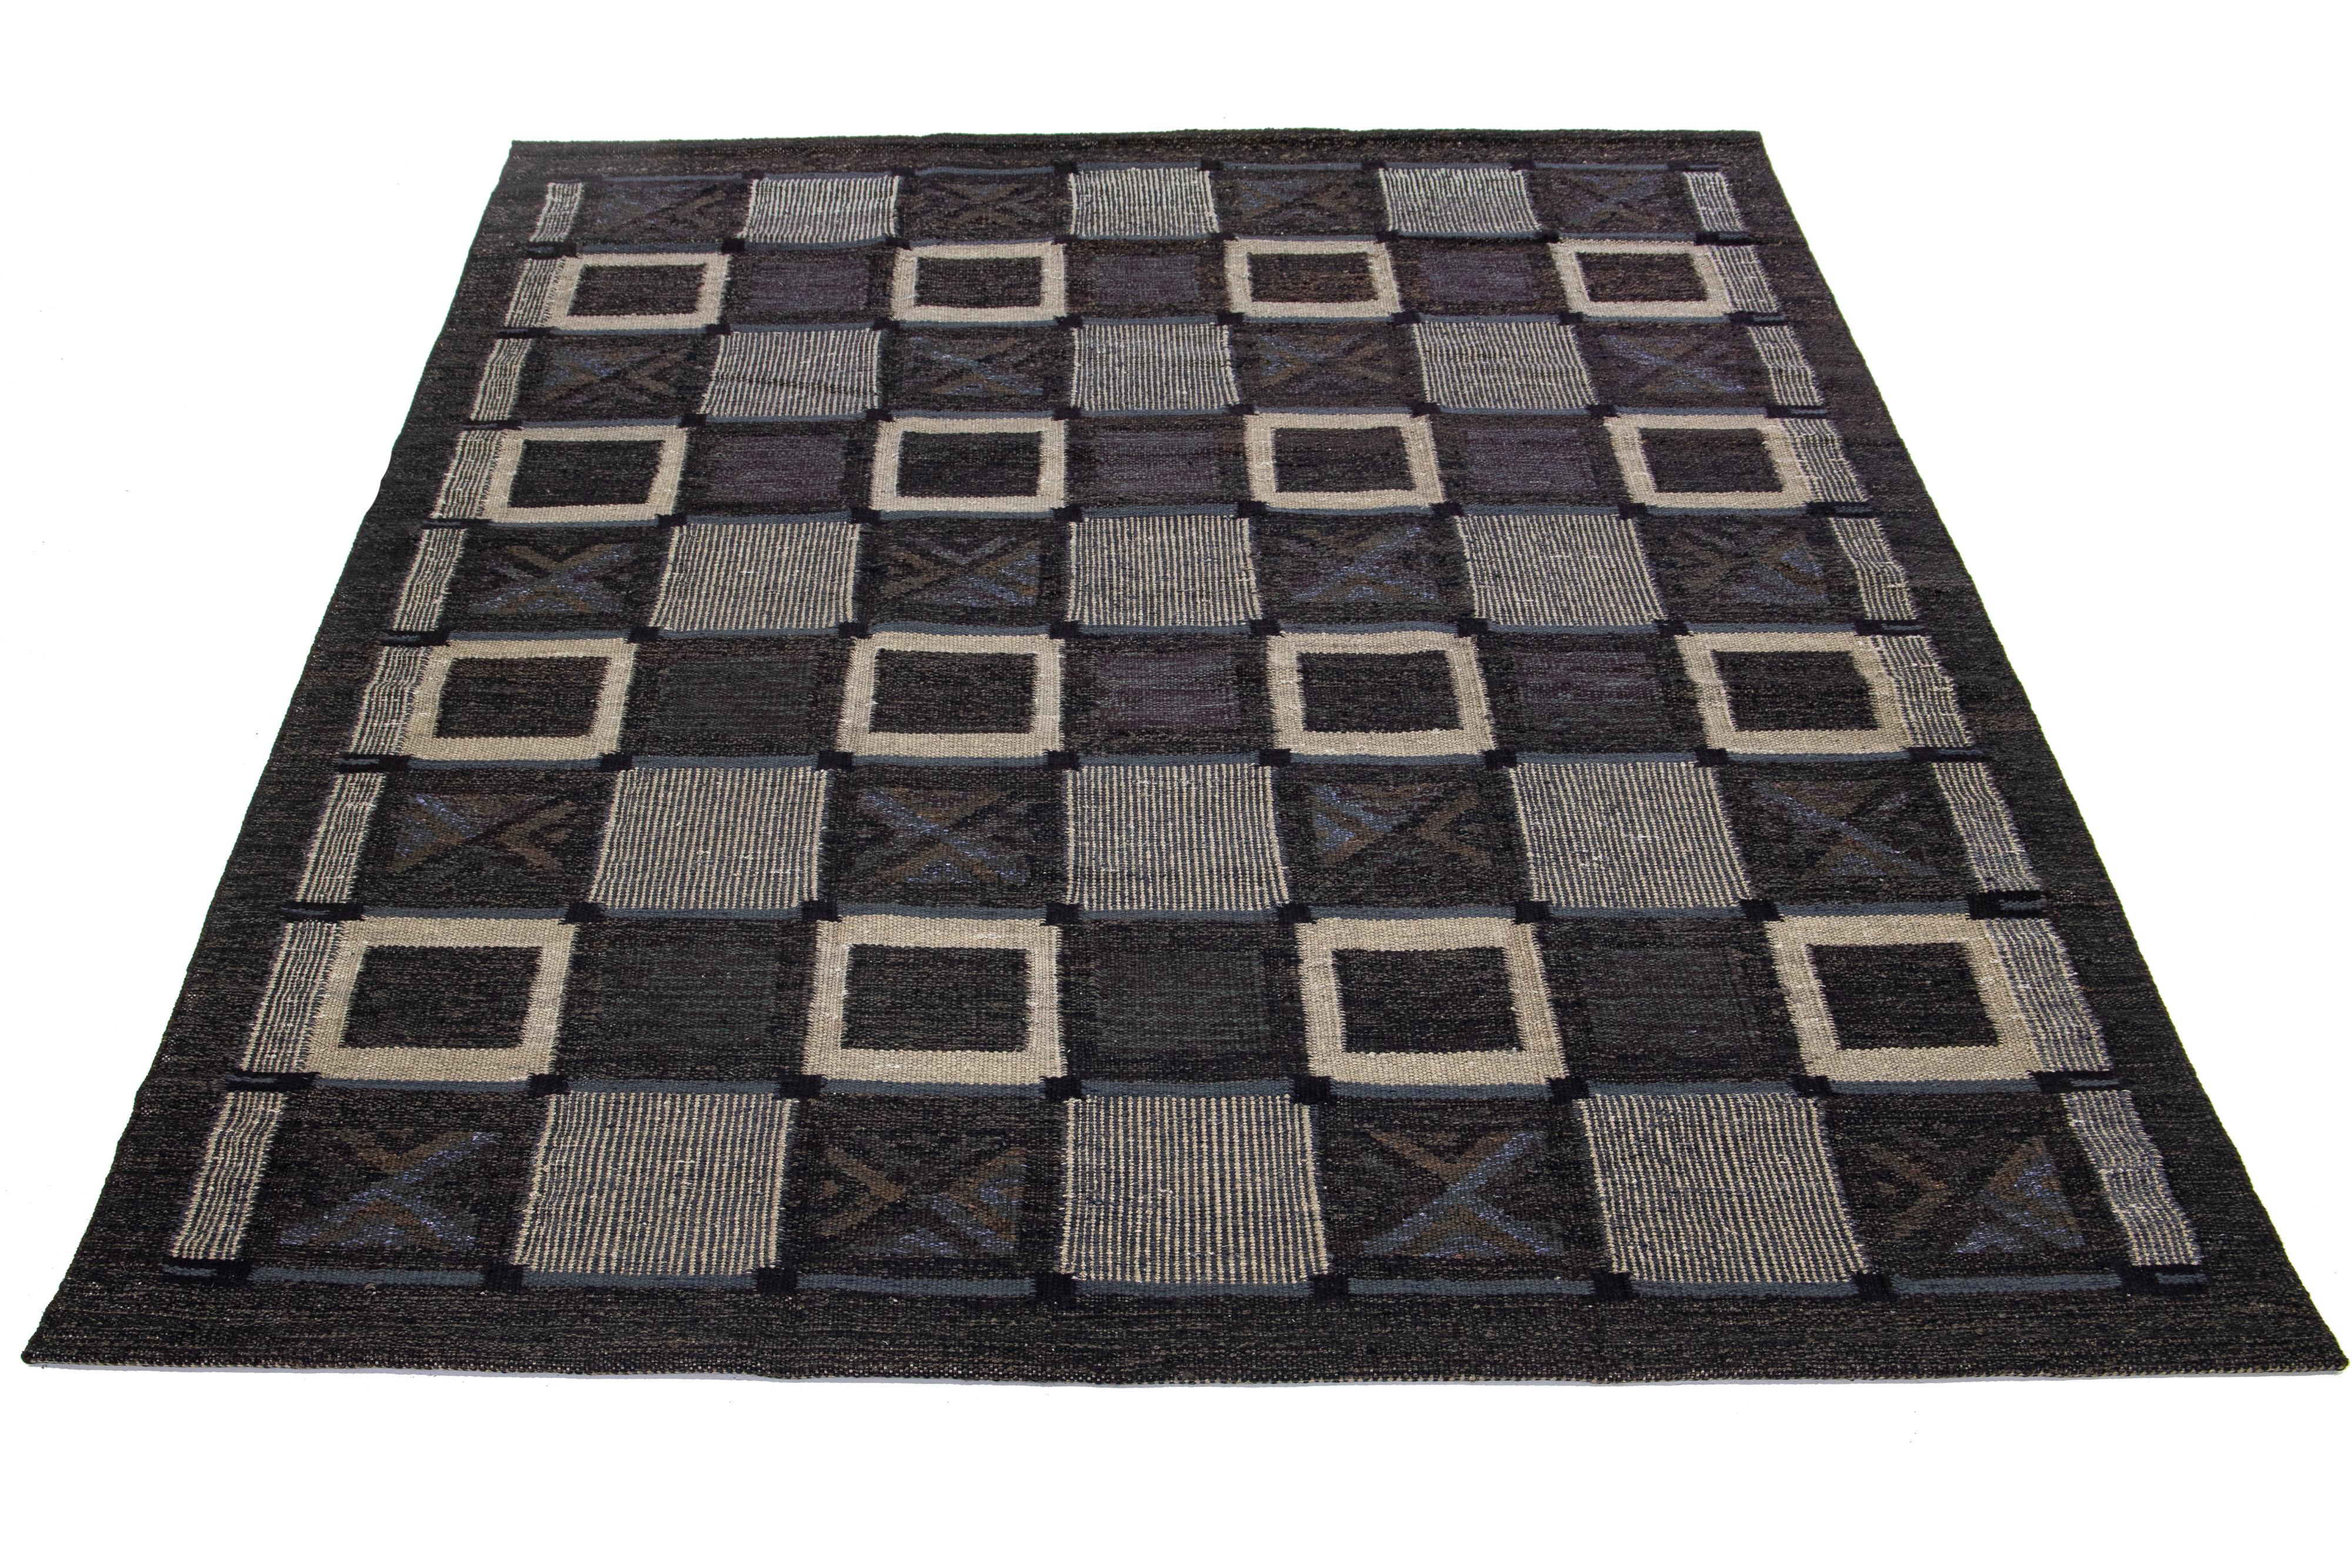 This flatweave rug features a modern Swedish design with a charcoal base. It is complemented by gray-blue, beige, and brown geometric patterns throughout the design.

 This rug measures 8'10